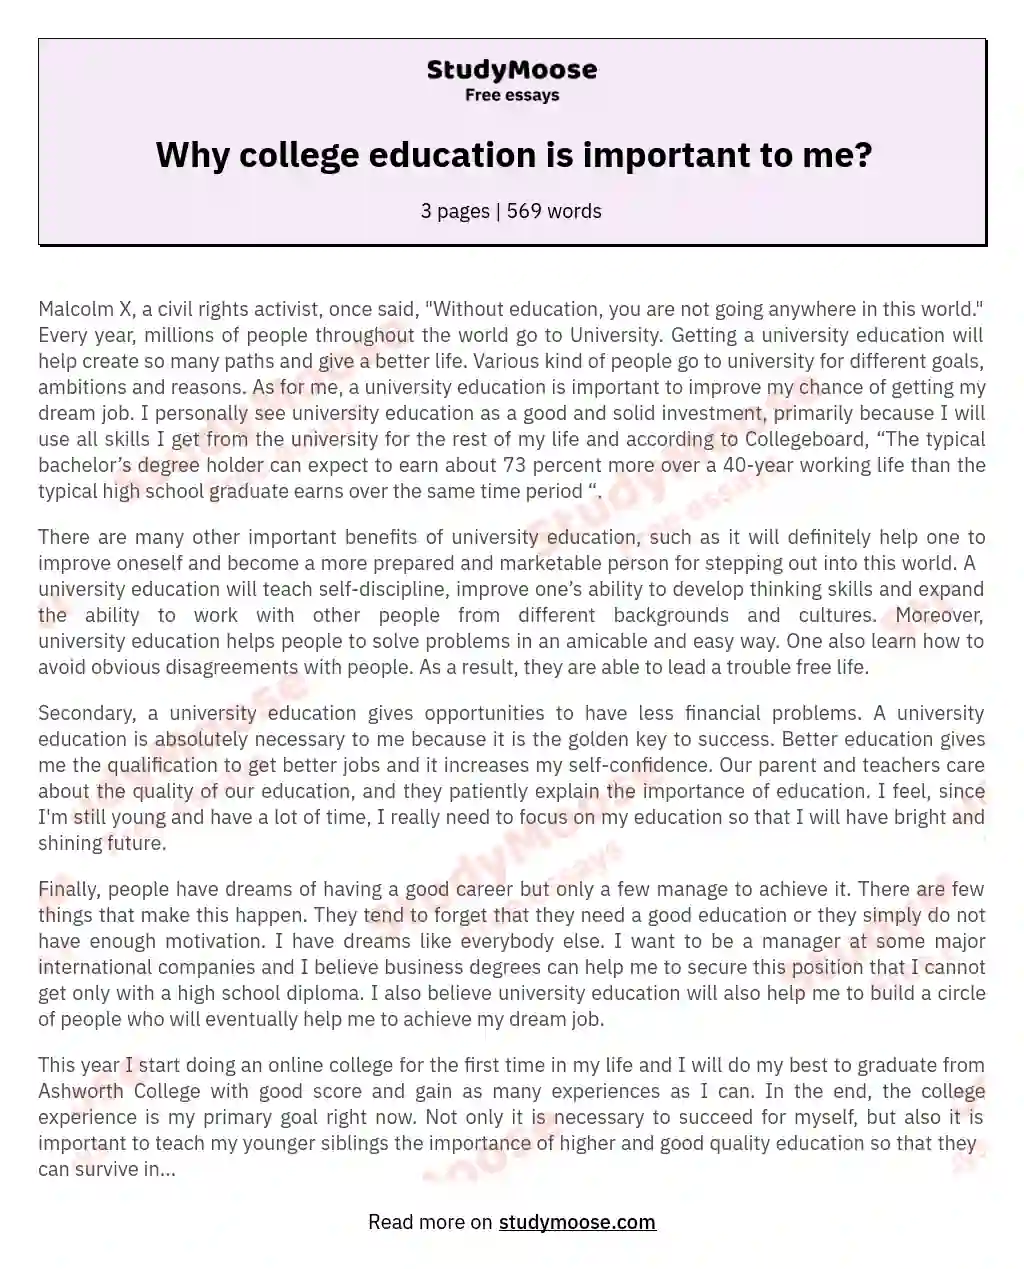 Why college education is important to me? essay